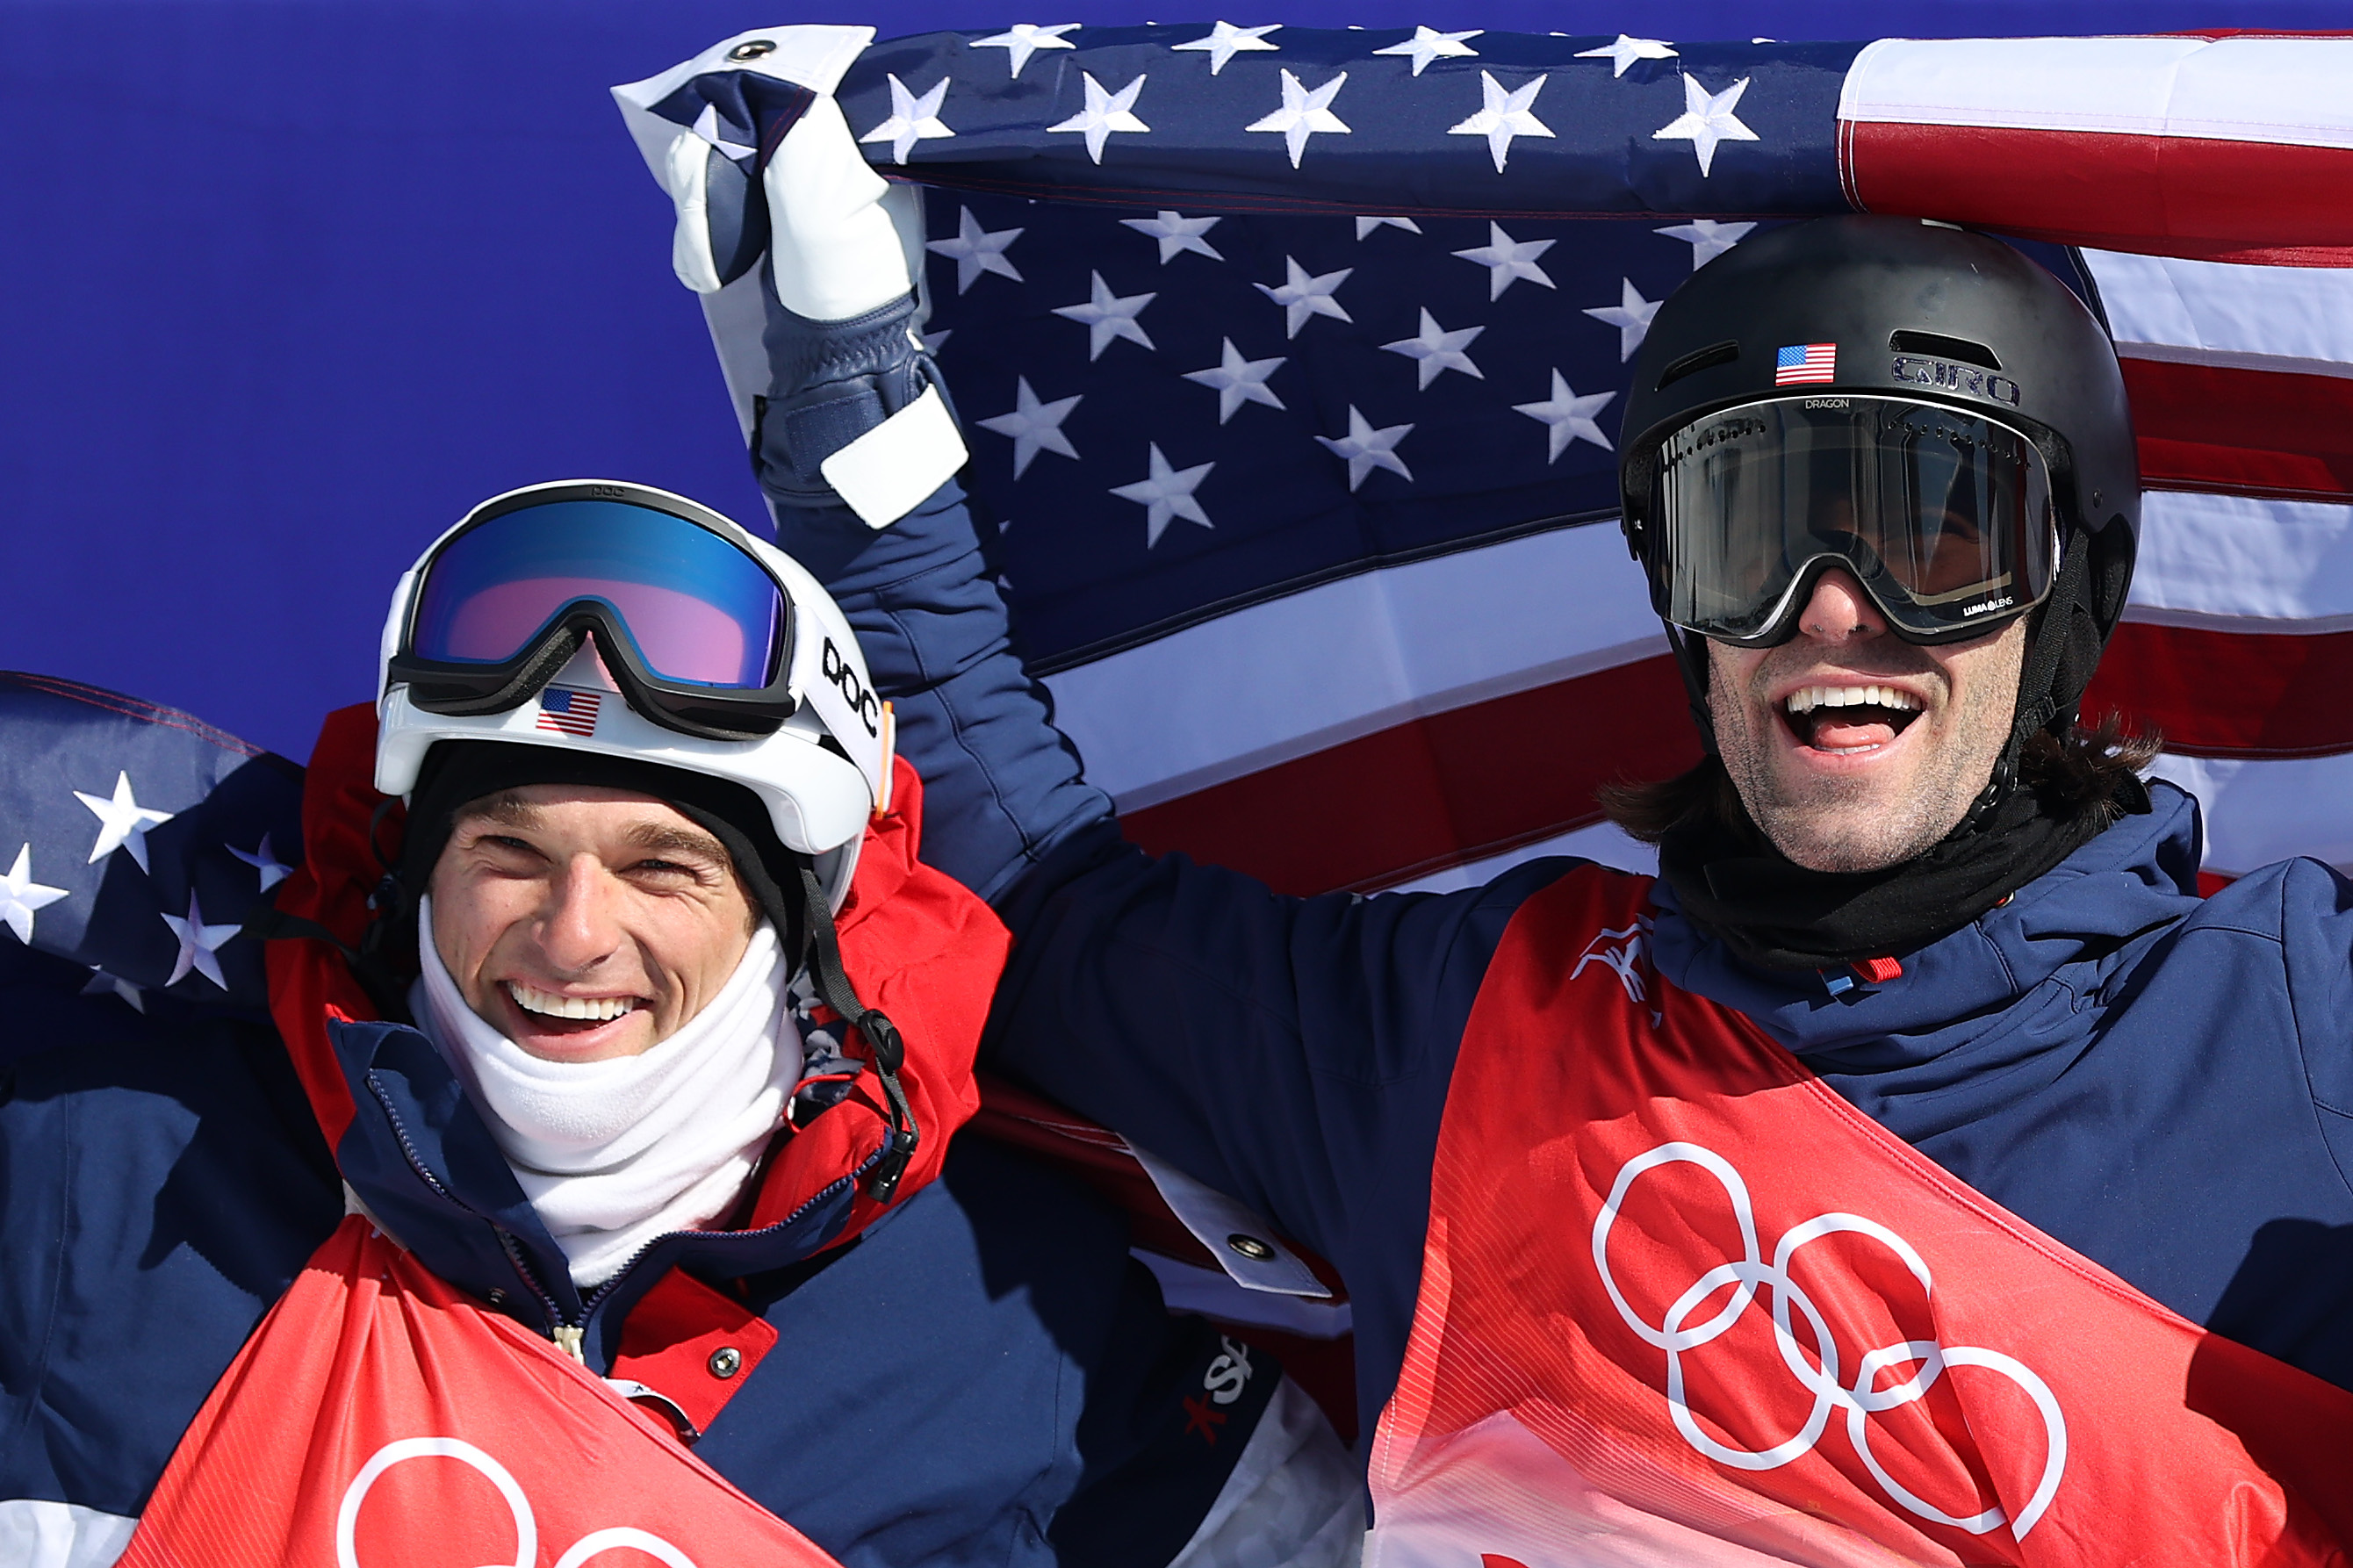 Alex Hall and Nick Goepper